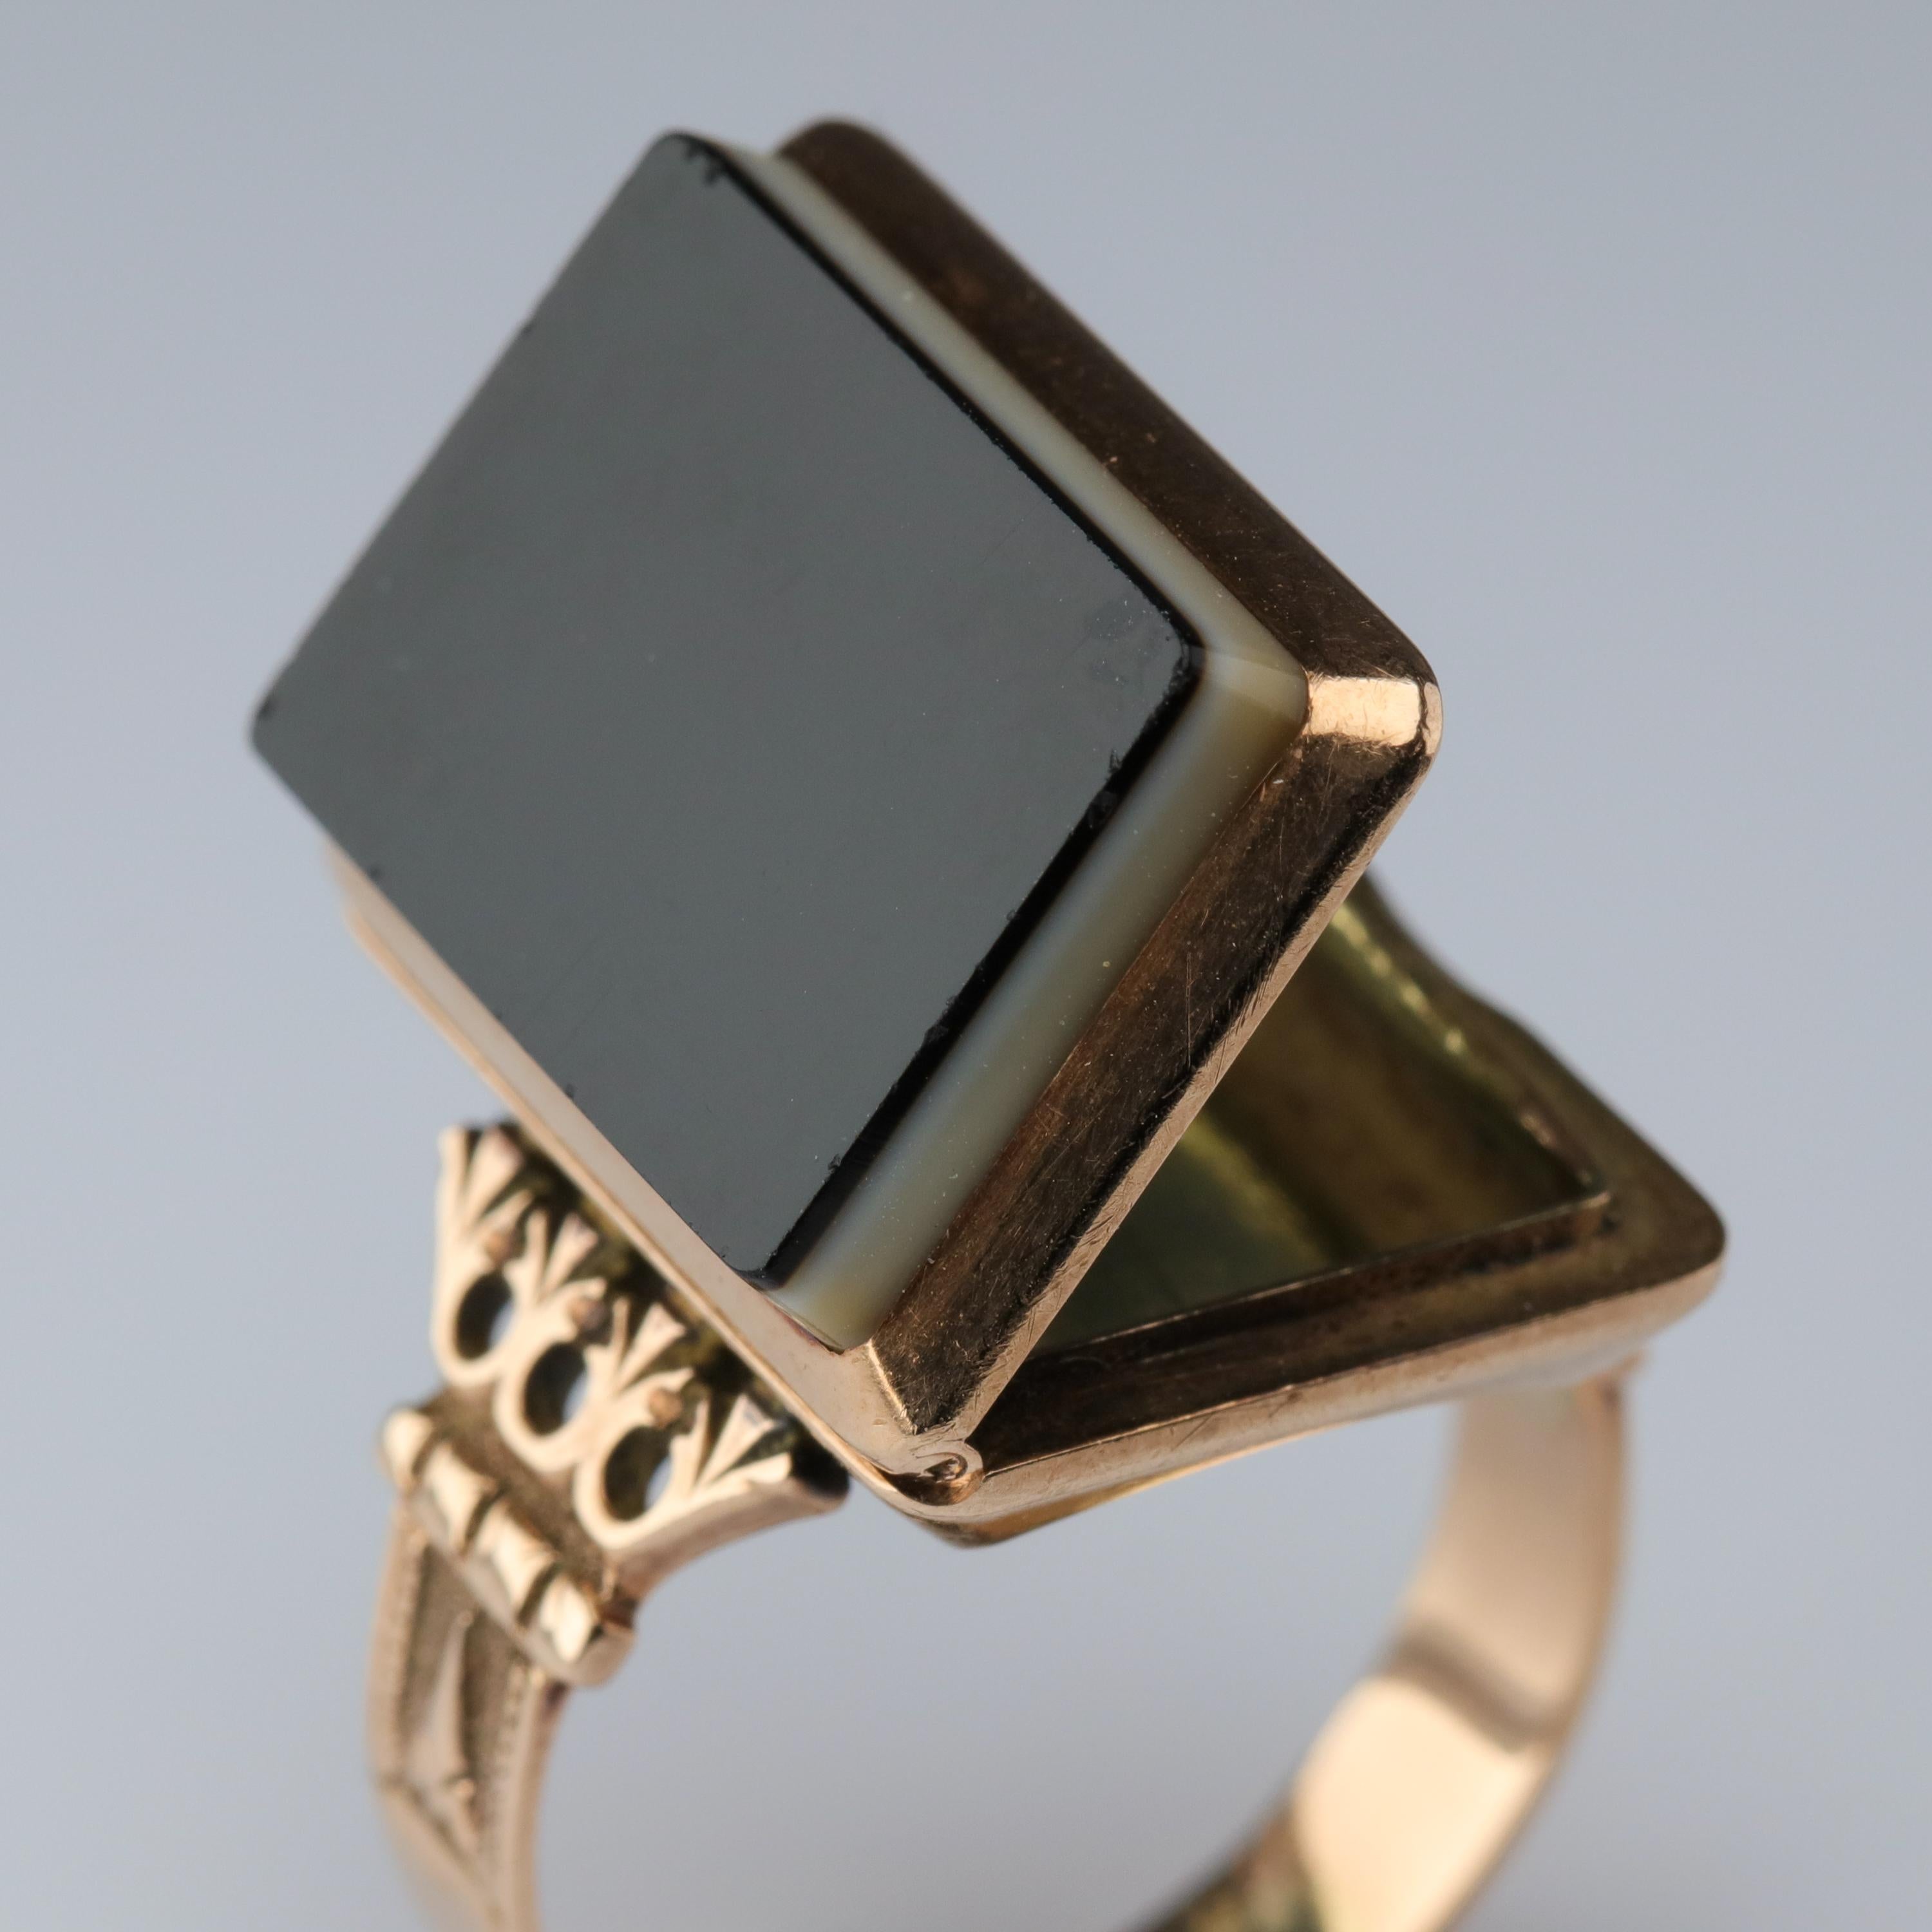 Georgian Poison Ring in Gold with Onyx is Cunningly Beautiful 4